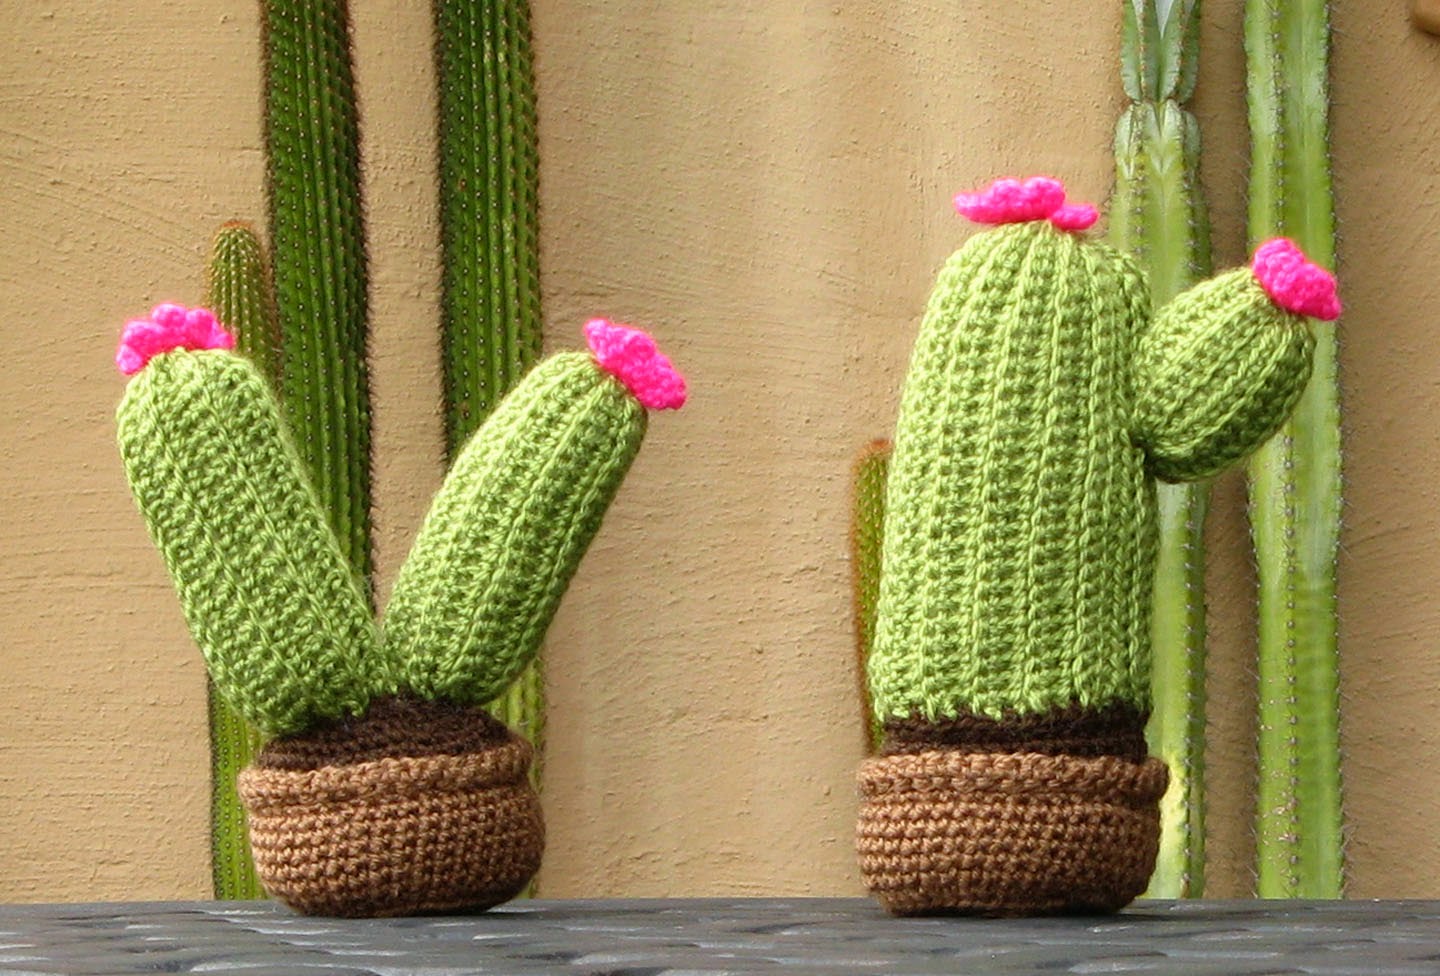 Acting My (Vint)Age: The Cuddly Cacti